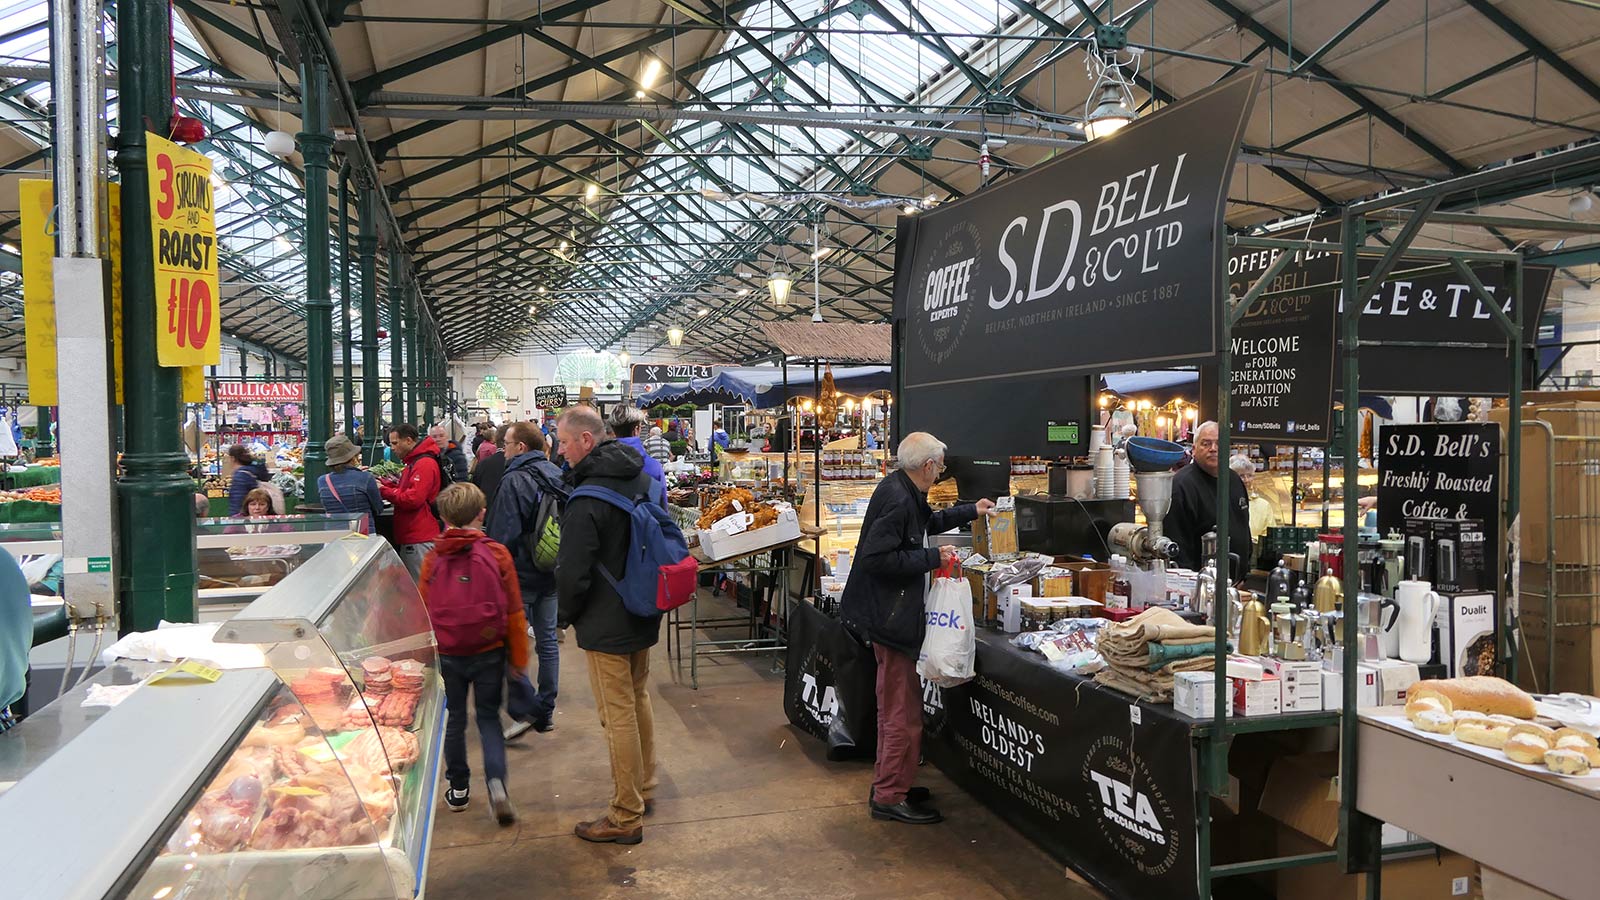 Saint George Market in Belfast, Northern Ireland. 24hrs itinerary for Belfast, drinks and petrol bombs